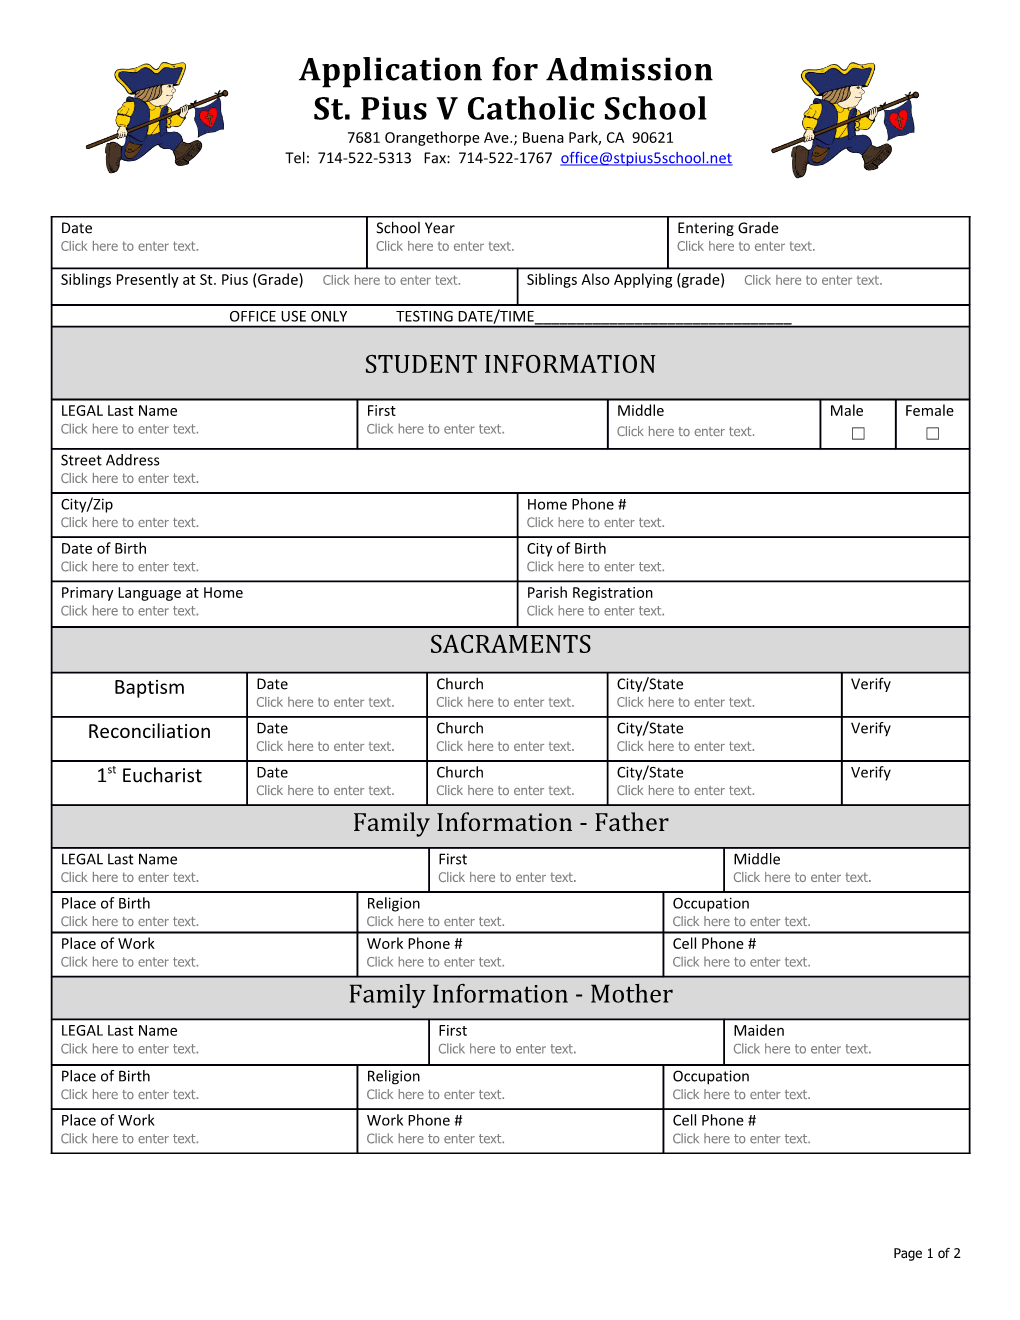 Application for Admission to St